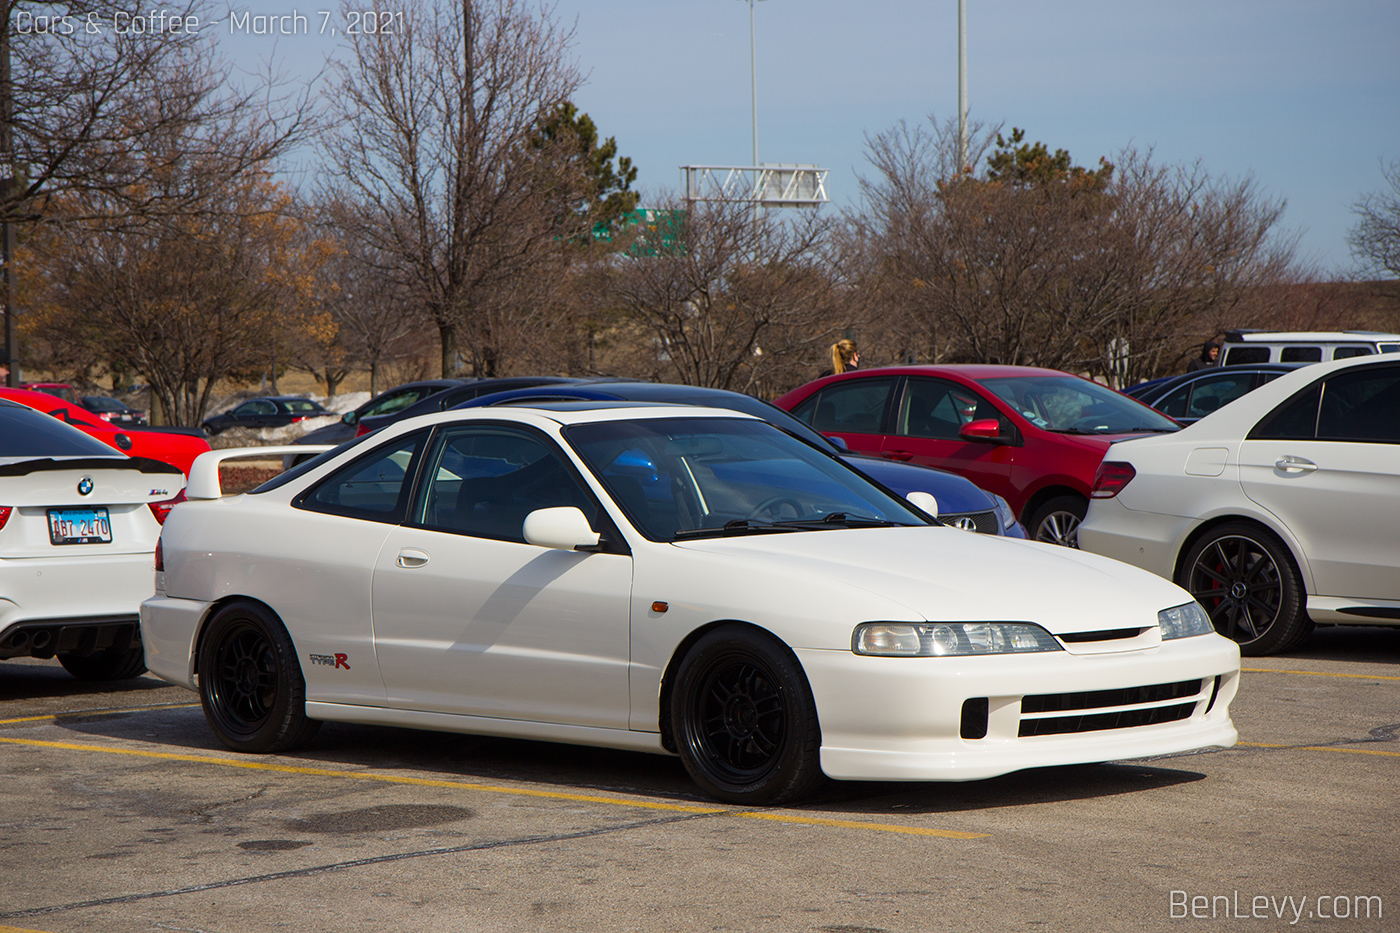 White DC2 Acura Integra with JDM Front